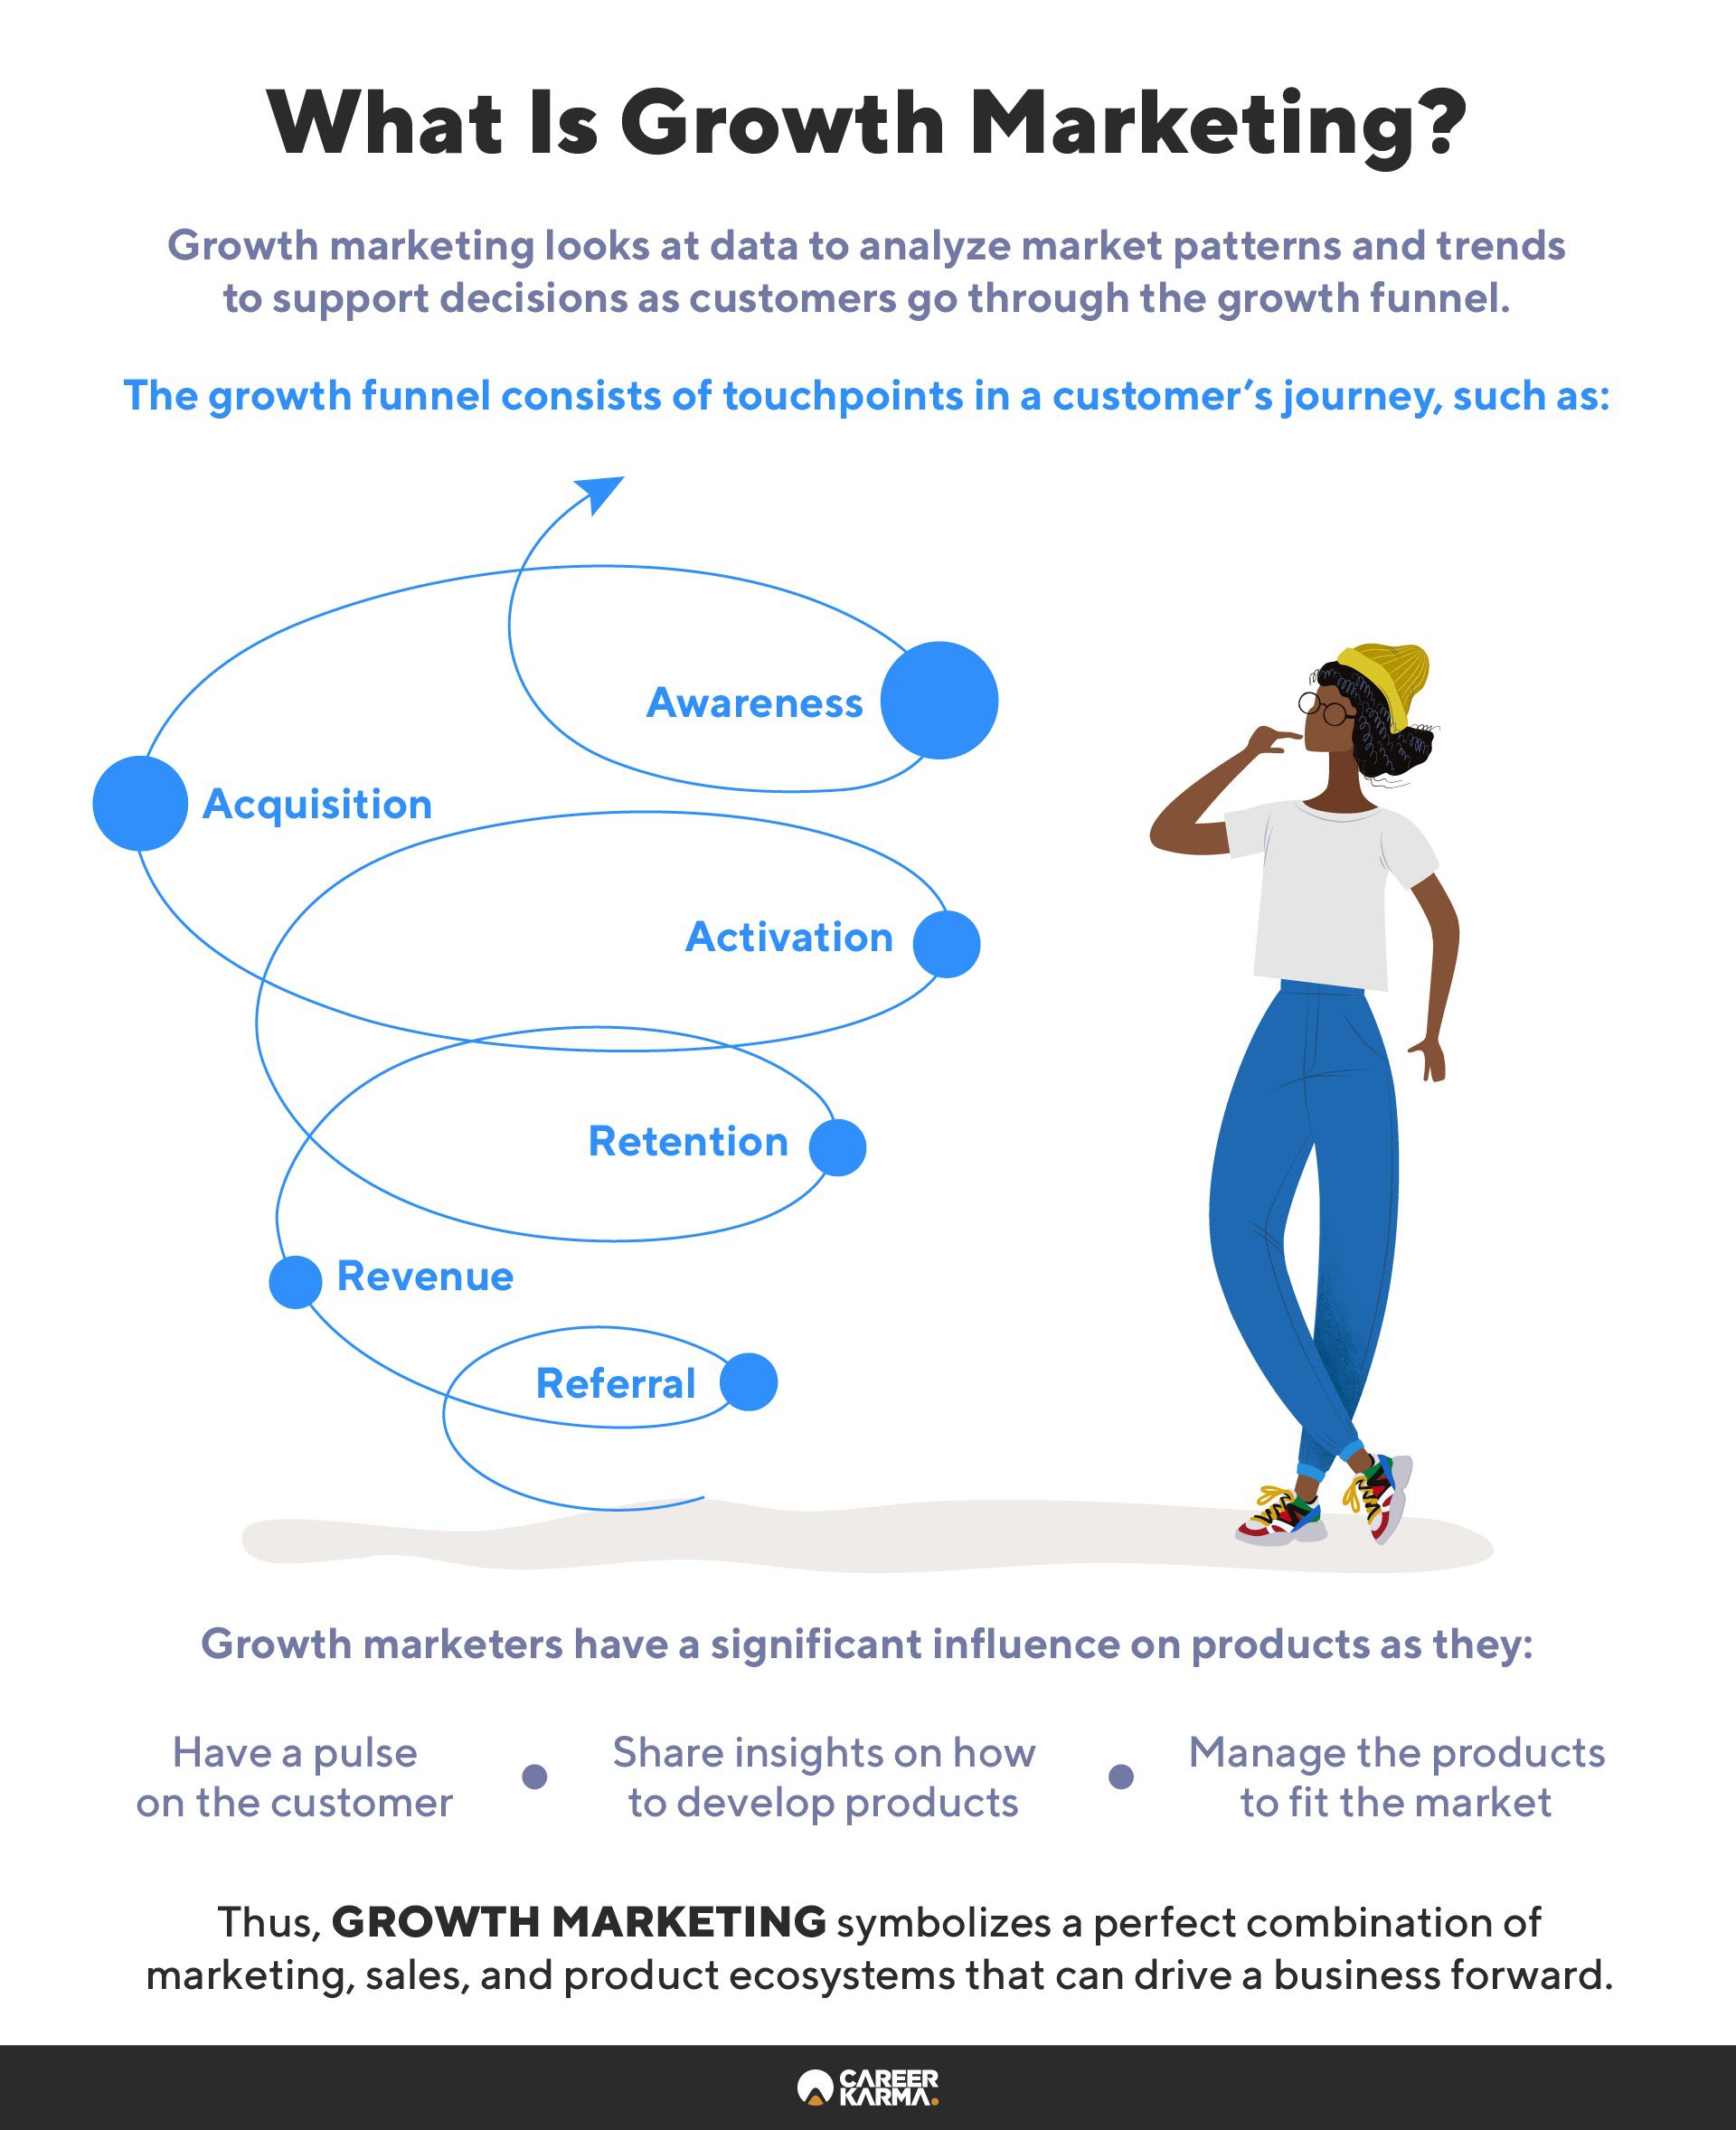 An infographic explaining what growth marketing is